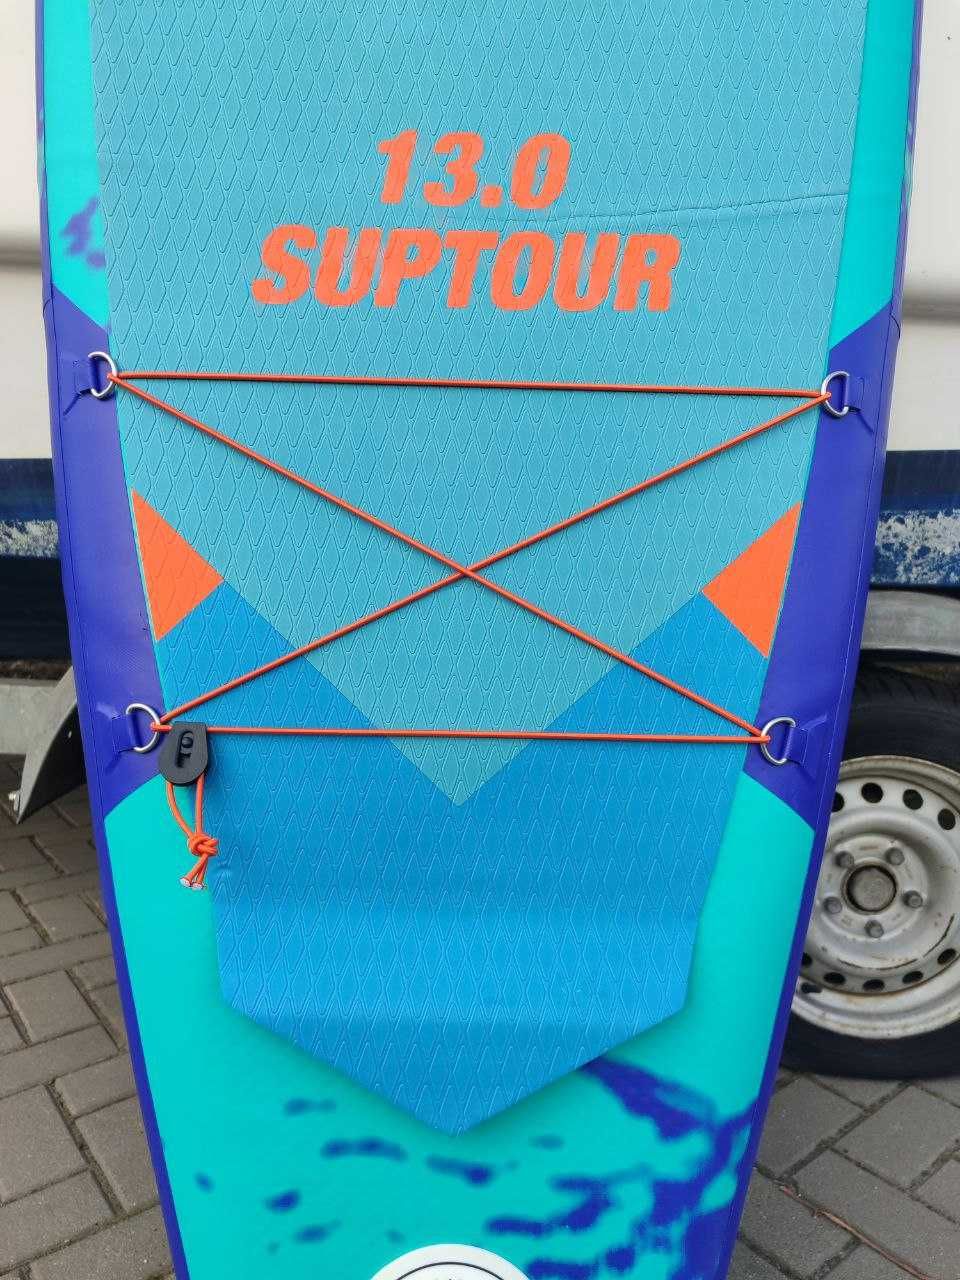 SPINERA Suptour 13 Ultr САП борд board доска SUP дошка 396